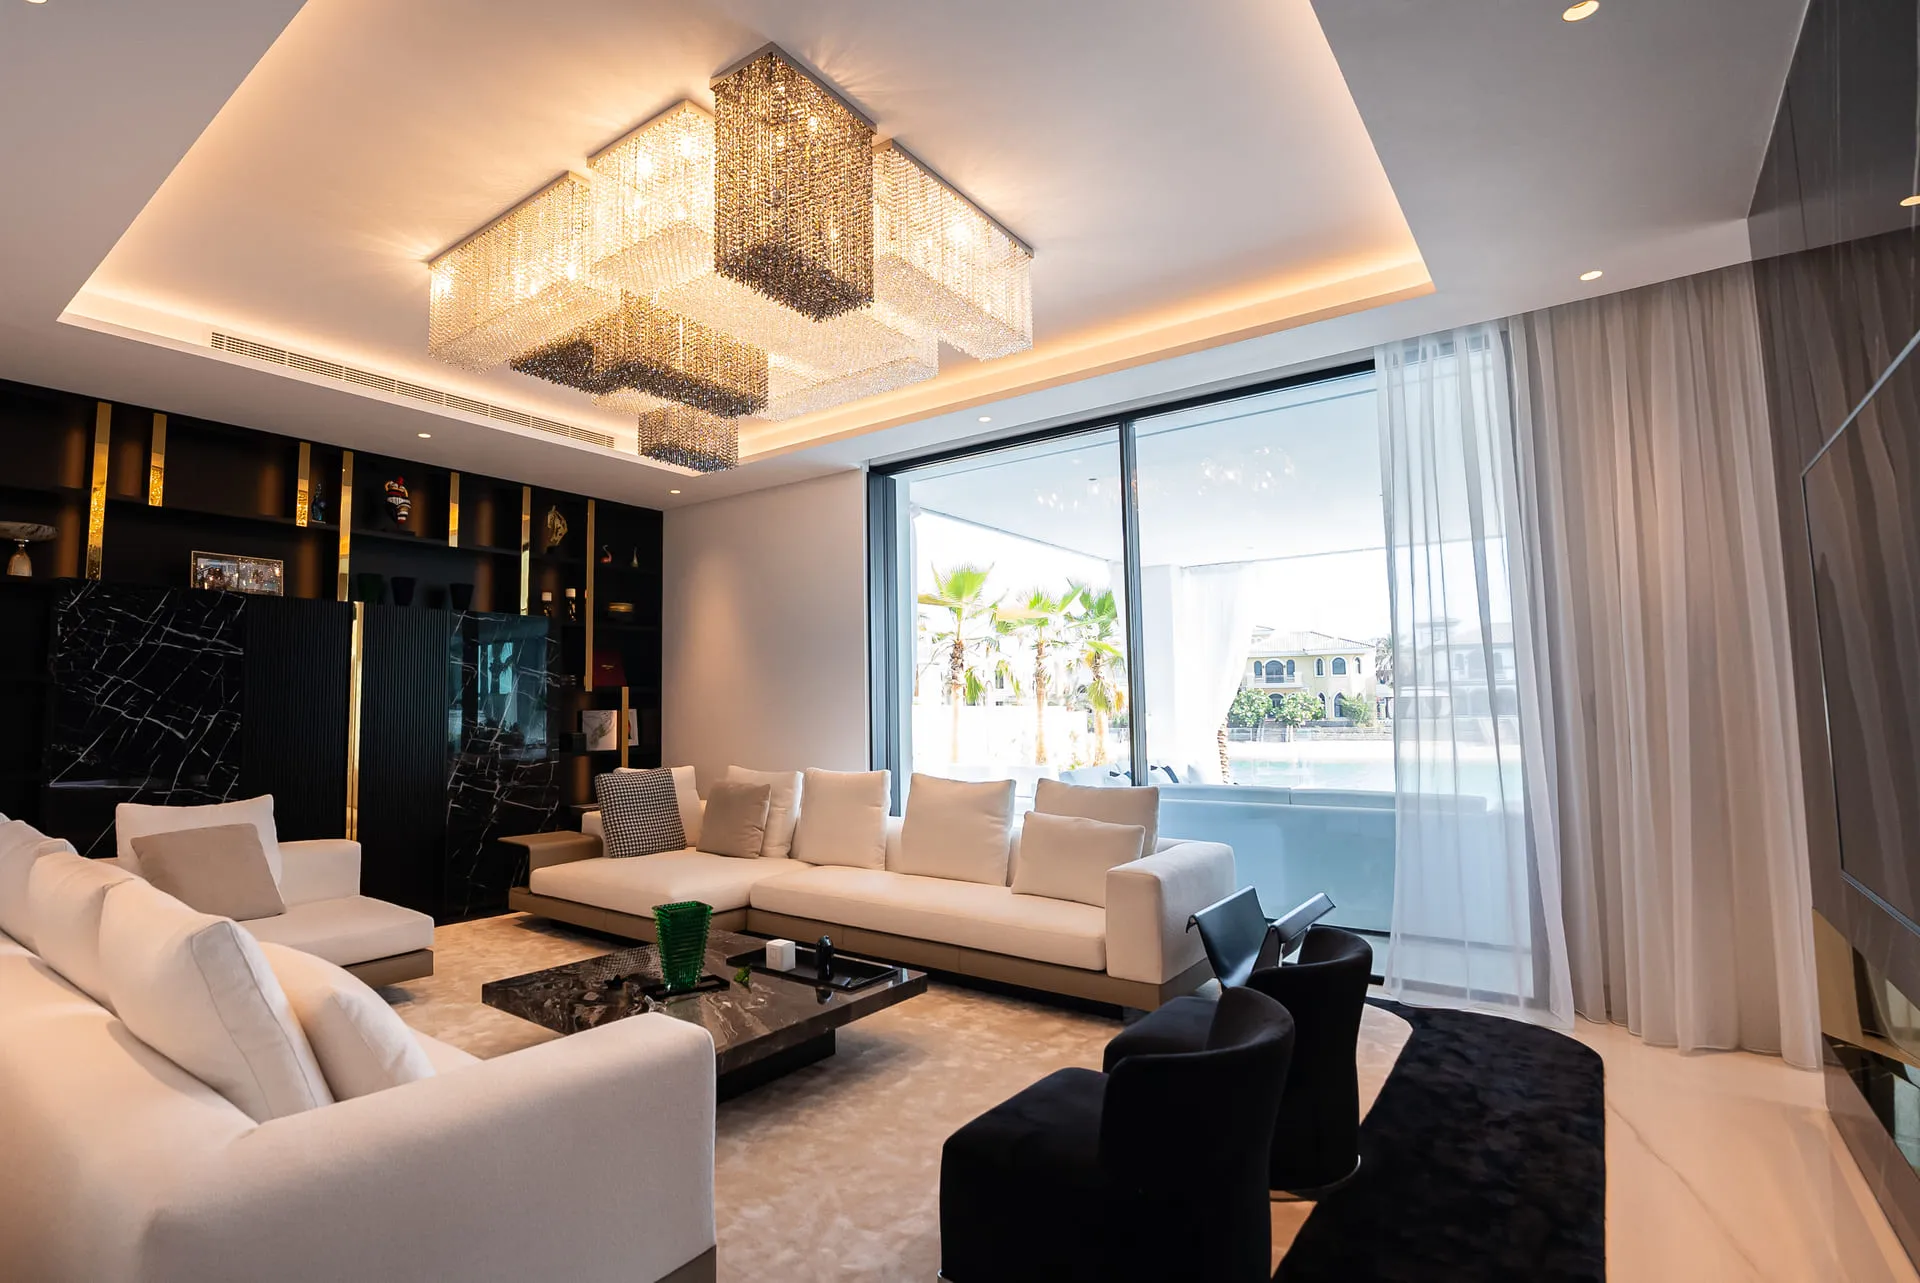 A modern living room with white furniture and a chandelier, creating an elegant and stylish ambiance.